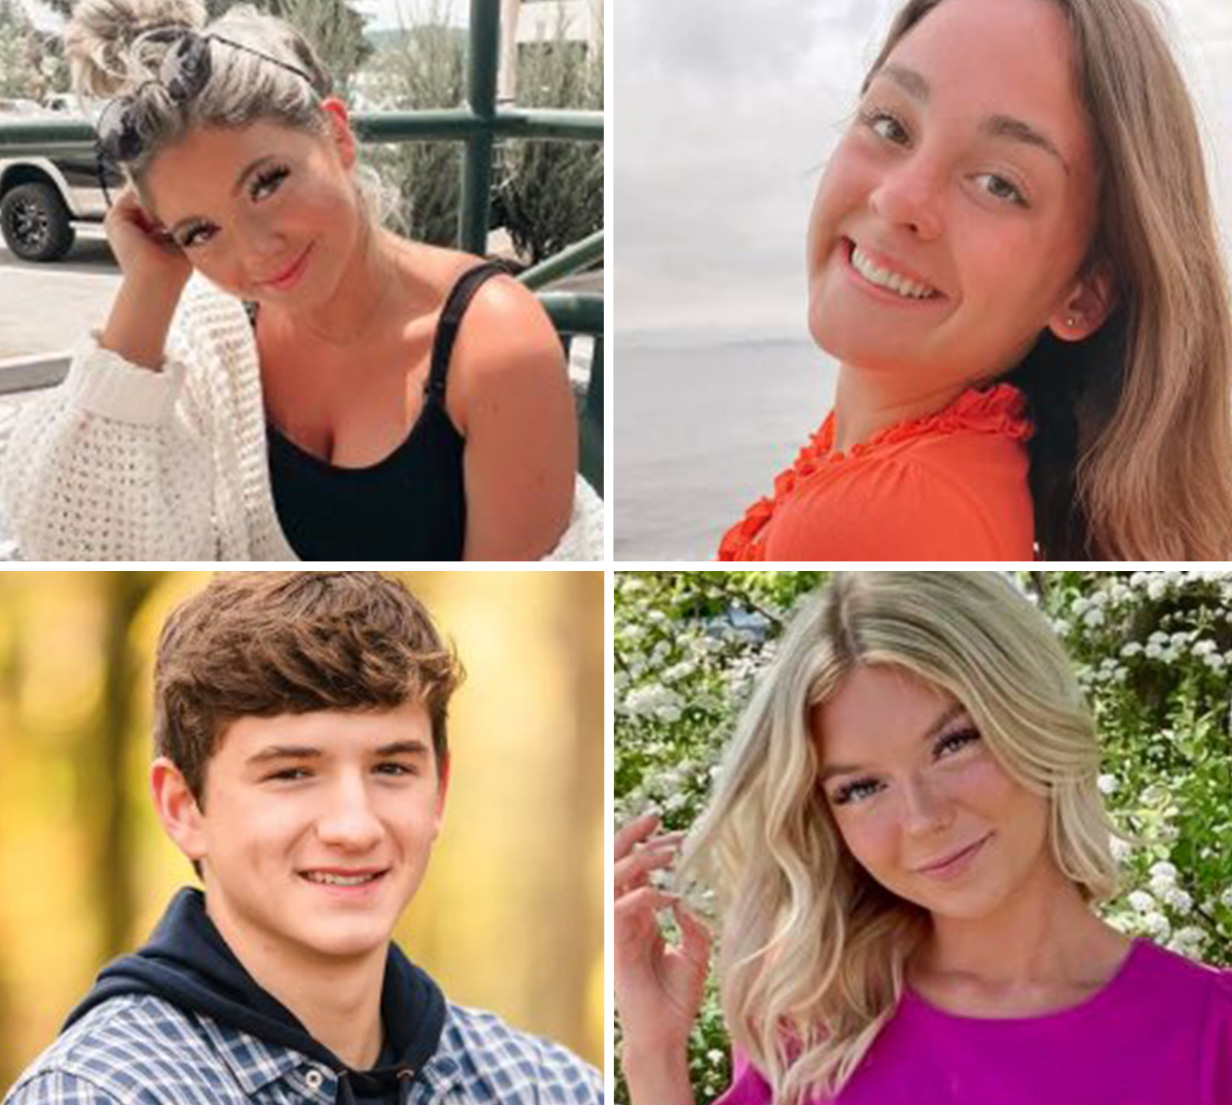 Idaho murders: Slain students' cars towed from crime scene two